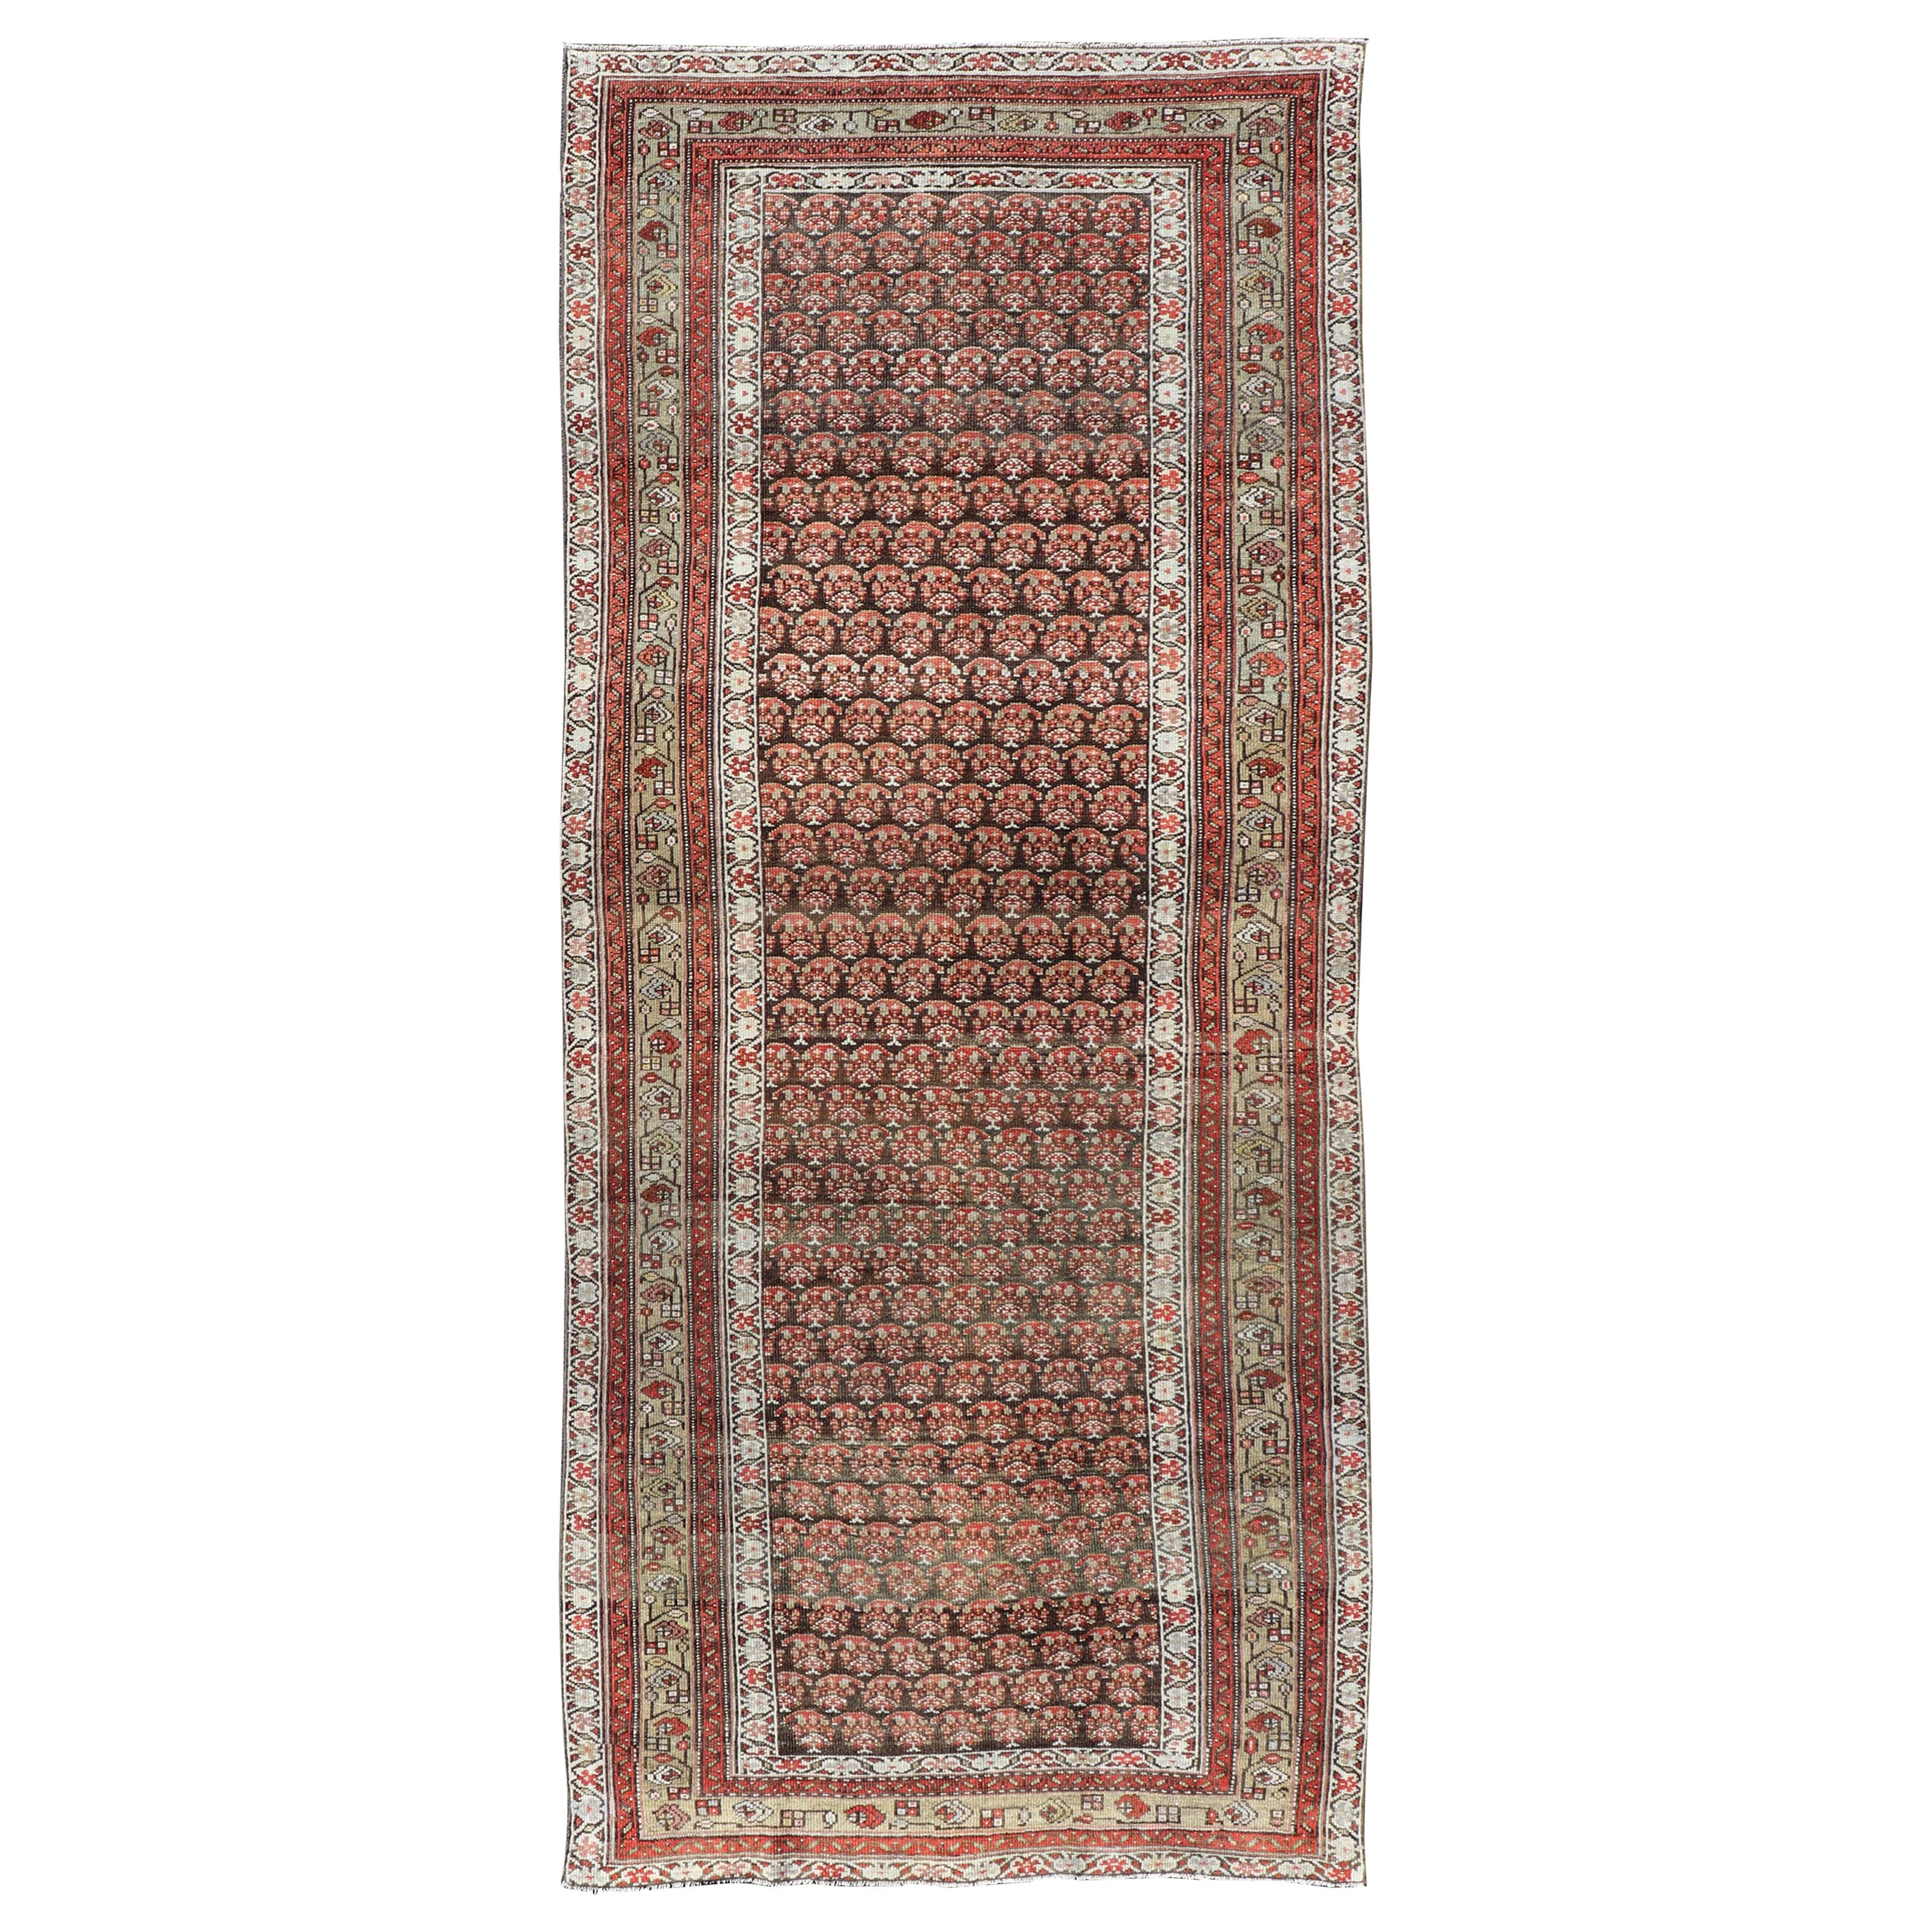 Antique Kurdish Gallery Runner with All-Over Paisley Design in Brown, Red, Green For Sale